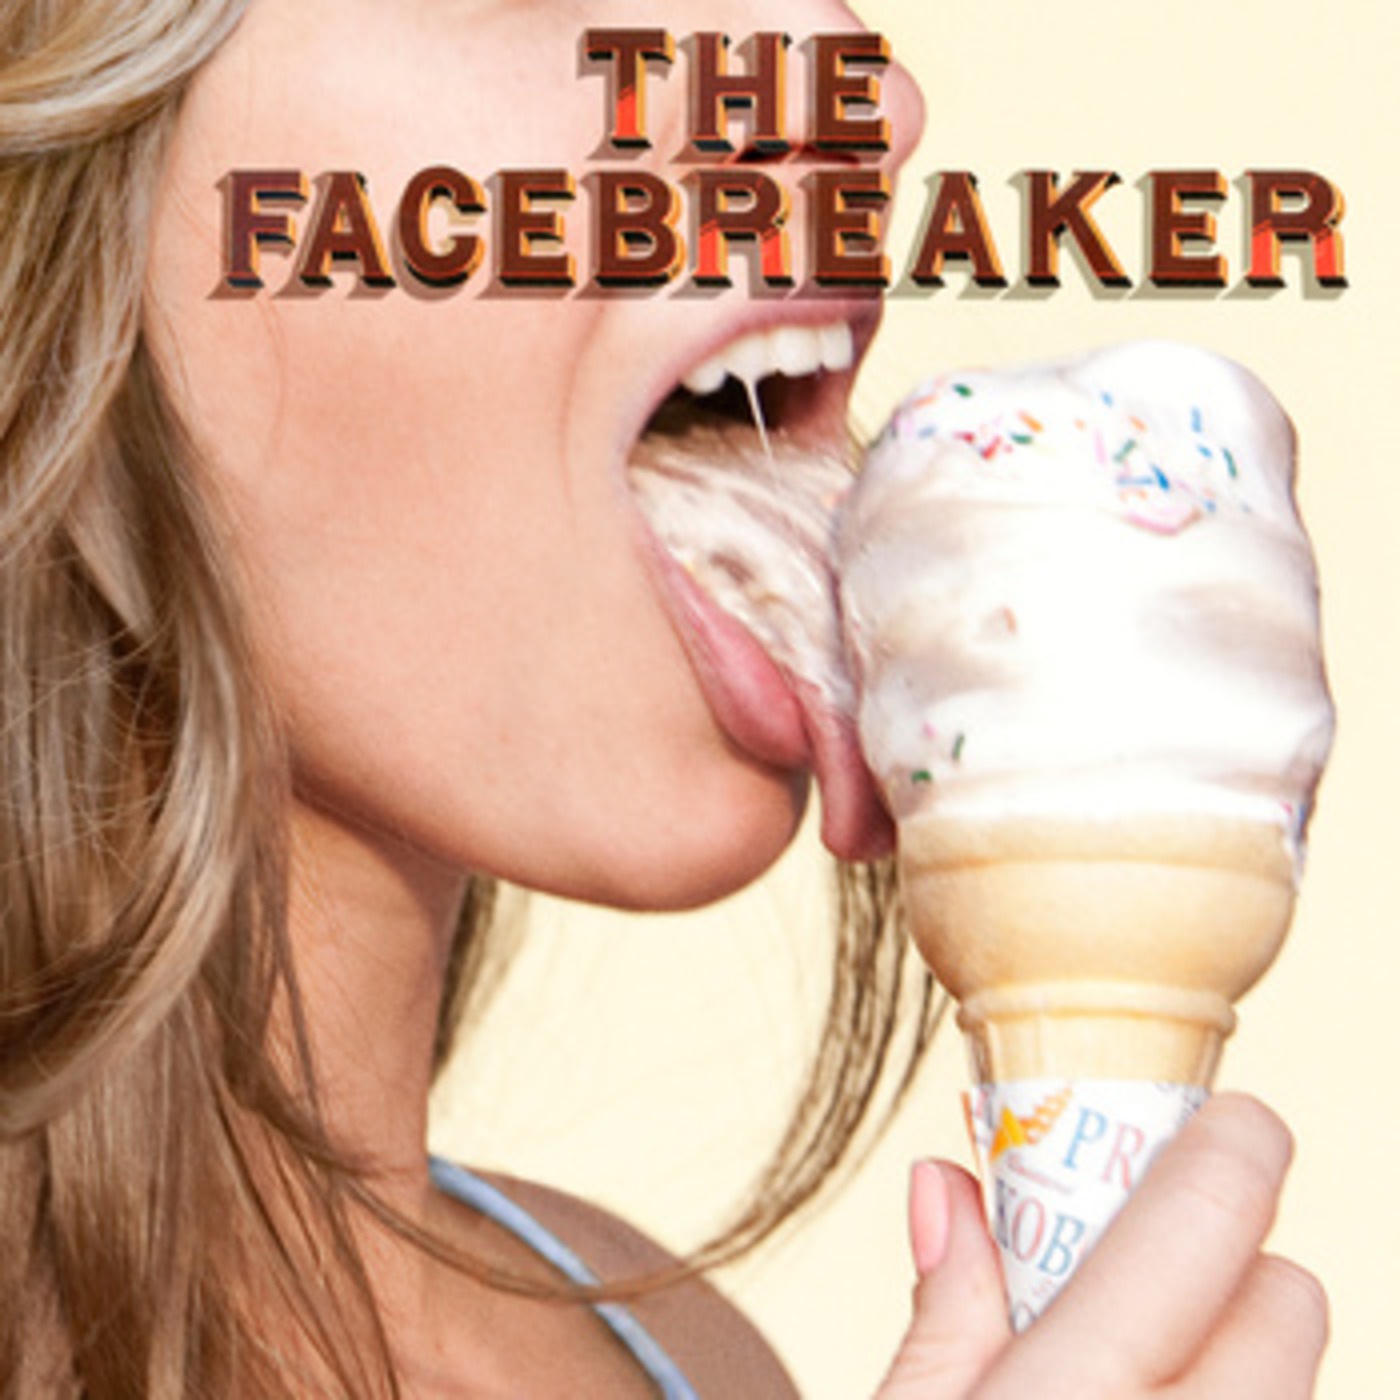 The Facebreaker - It Just Do/It Just Don't